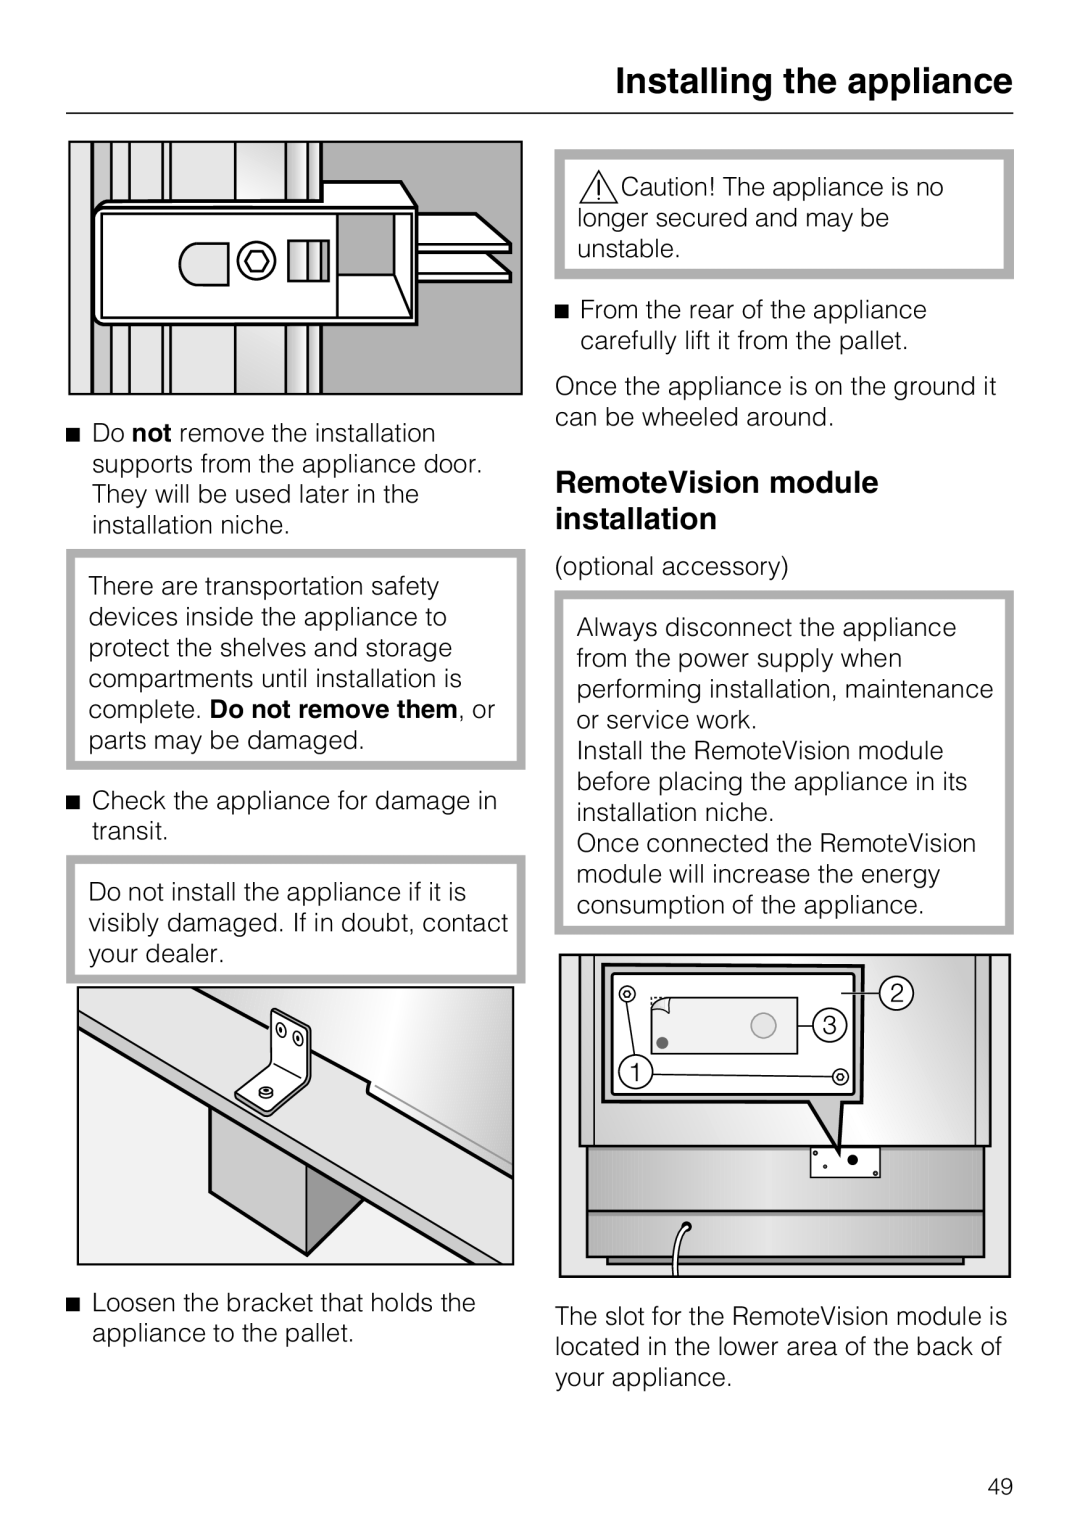 Miele 09 920 570 installation instructions RemoteVision module installation, Installing the appliance 